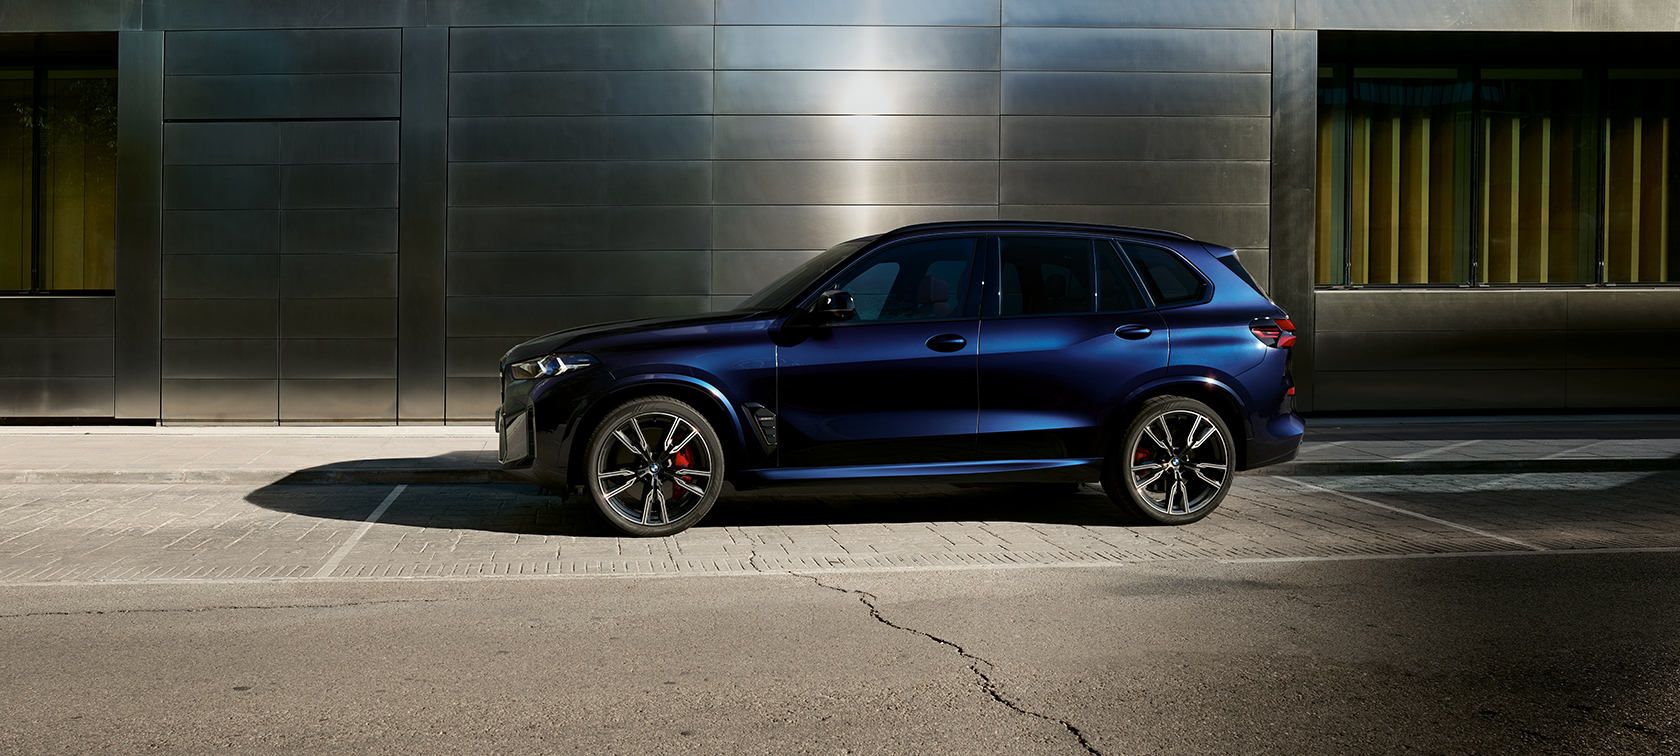 THE X5 - 